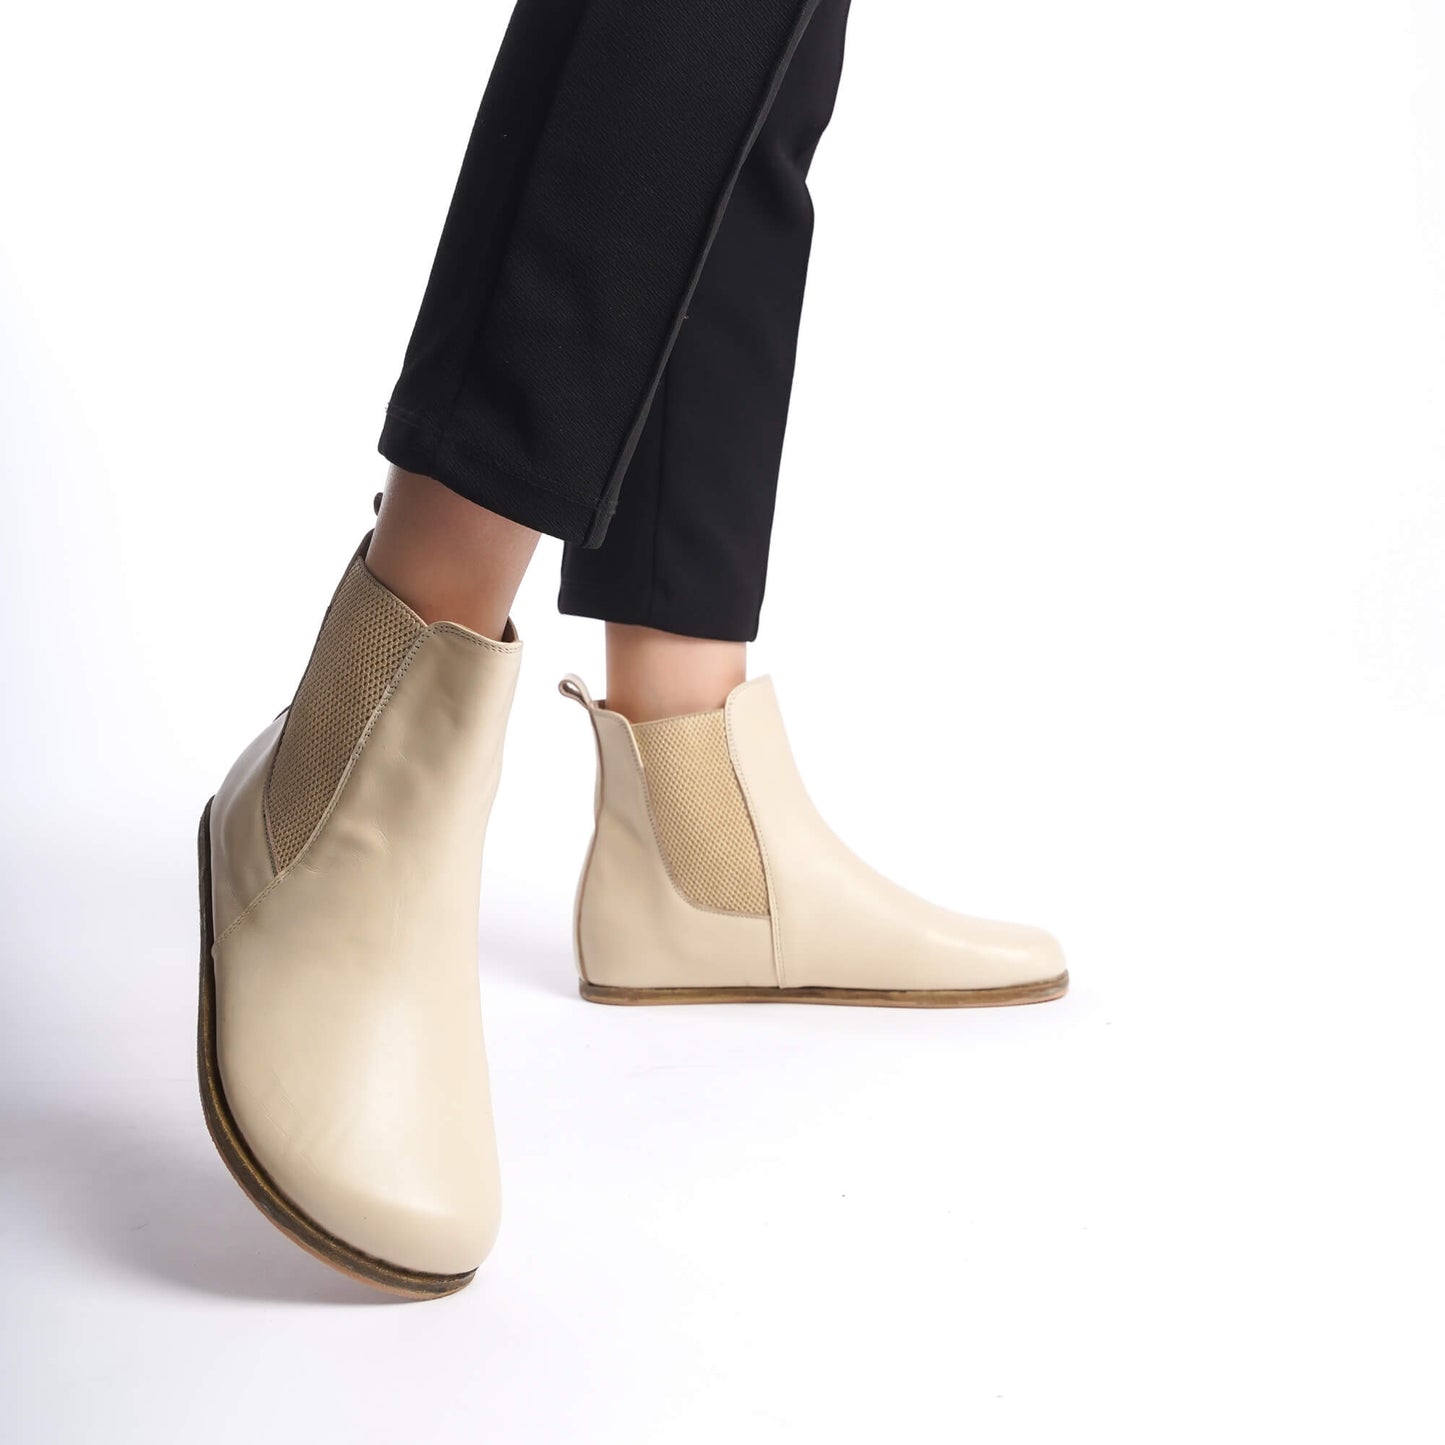 Women's cream Chelsea boots made from high-quality natural leather. Wide toe box design for superior comfort and minimal style.